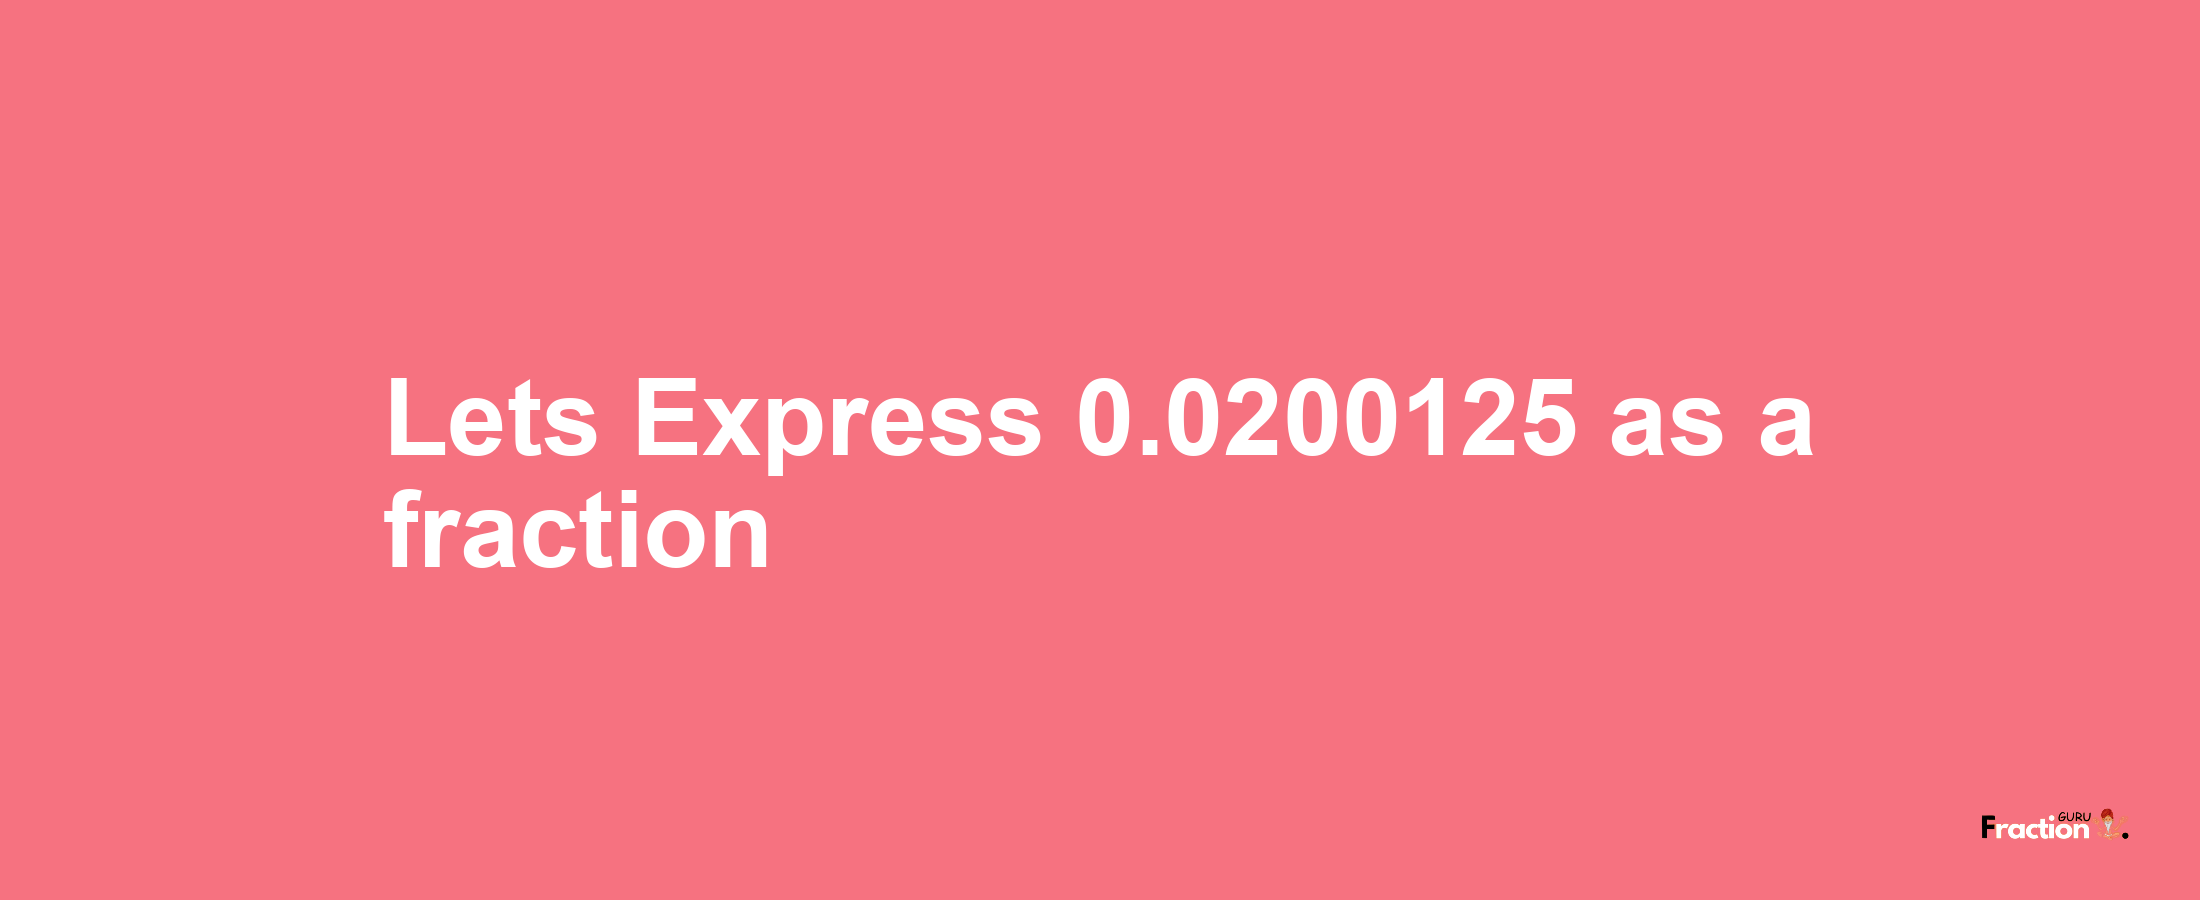 Lets Express 0.0200125 as afraction